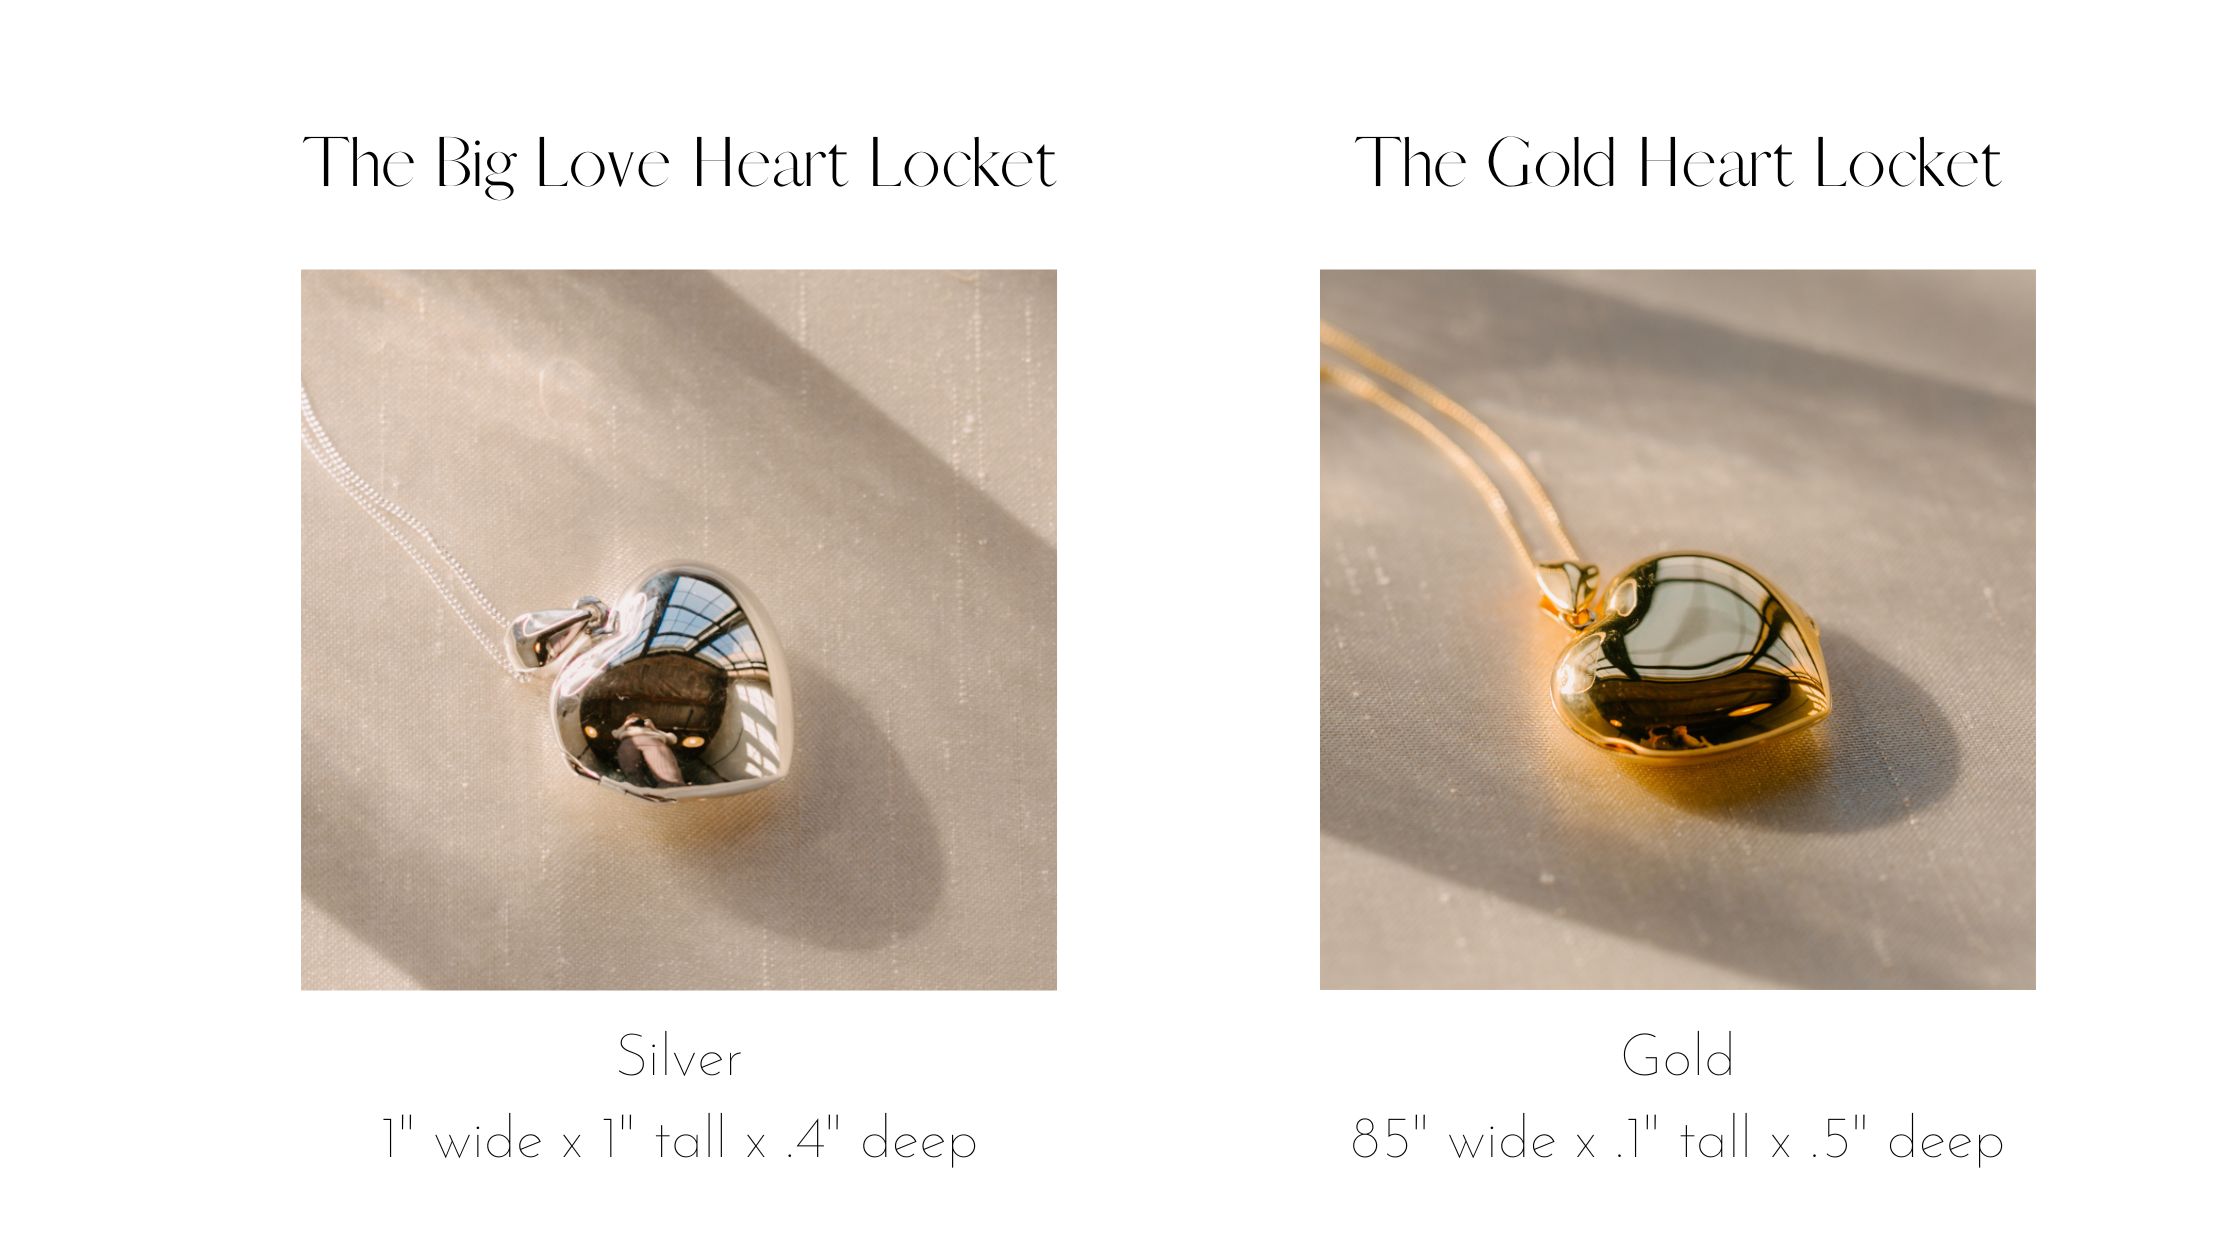 Silver and Gold Heart Lockets